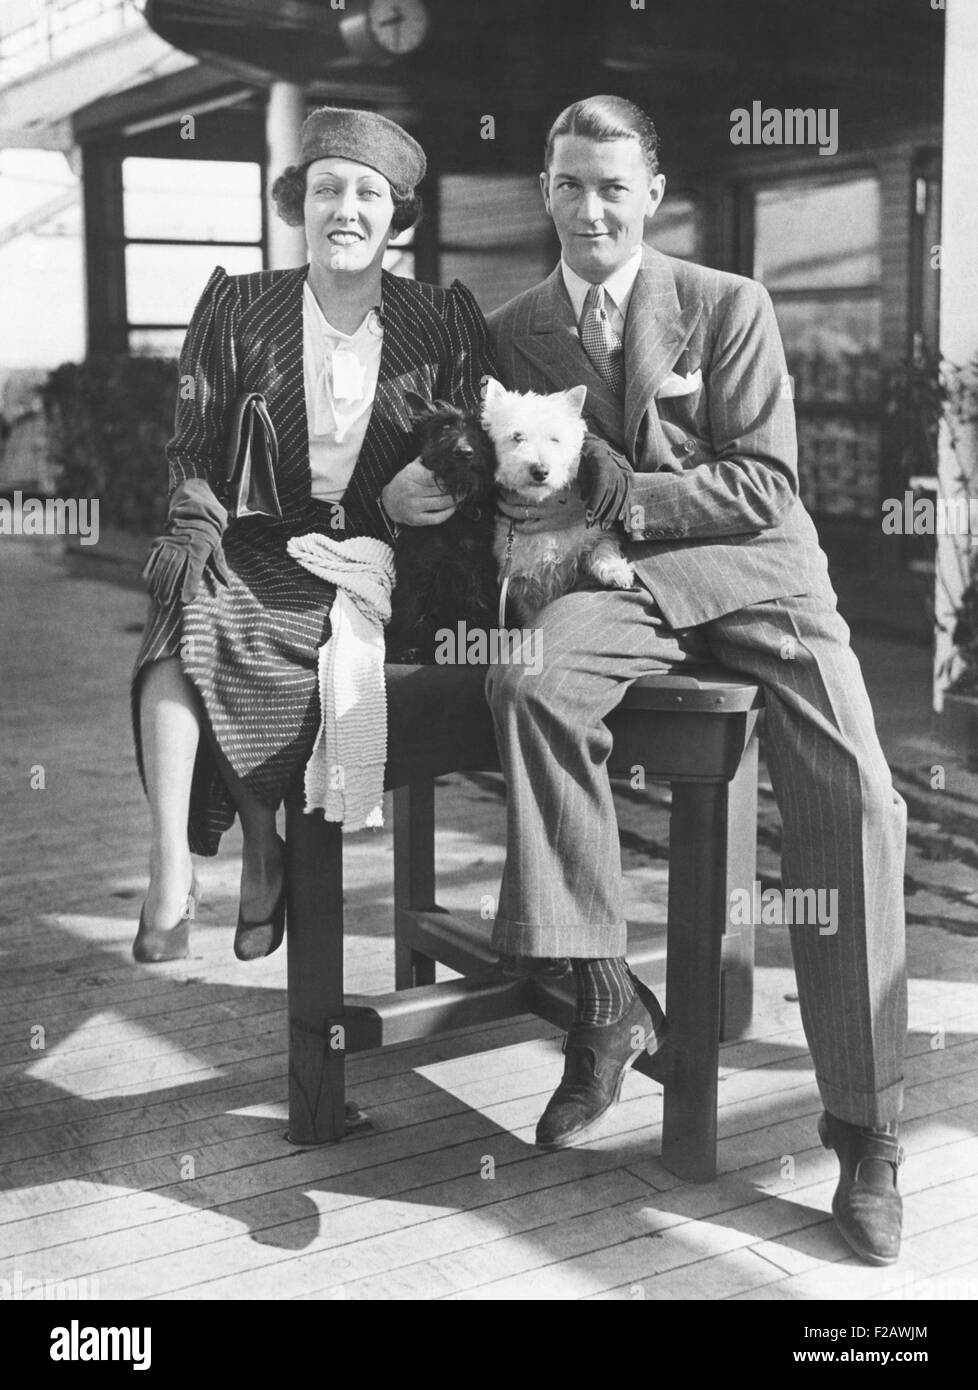 Gloria Swanson with her husband, Michael farmer, her 4th husband. March 16, 1933. They arrived in NYC after she produced the English film, PERFECT UNDERSTANDING. It did not revive her movie career as hoped. Swanson was married to Farmer from 1931 to 1934. They had one child, Michelle Bridget Farmer. (CSU 2015 11 1347) Stock Photo